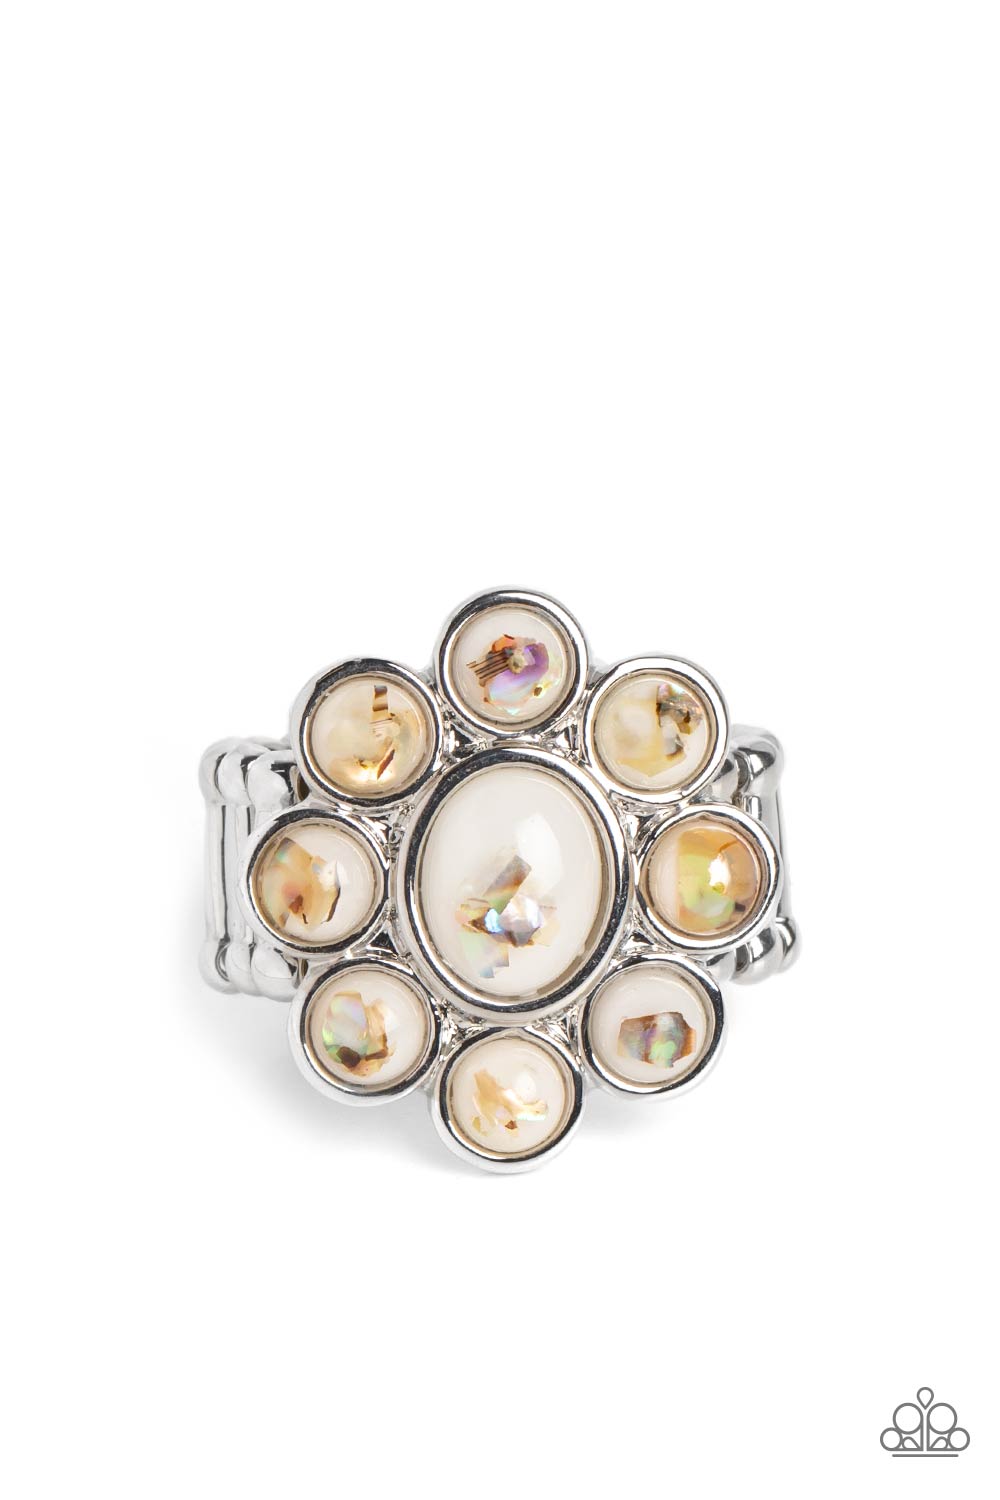 Time to SHELL-ebrate - White (Iridescent Shell) Ring